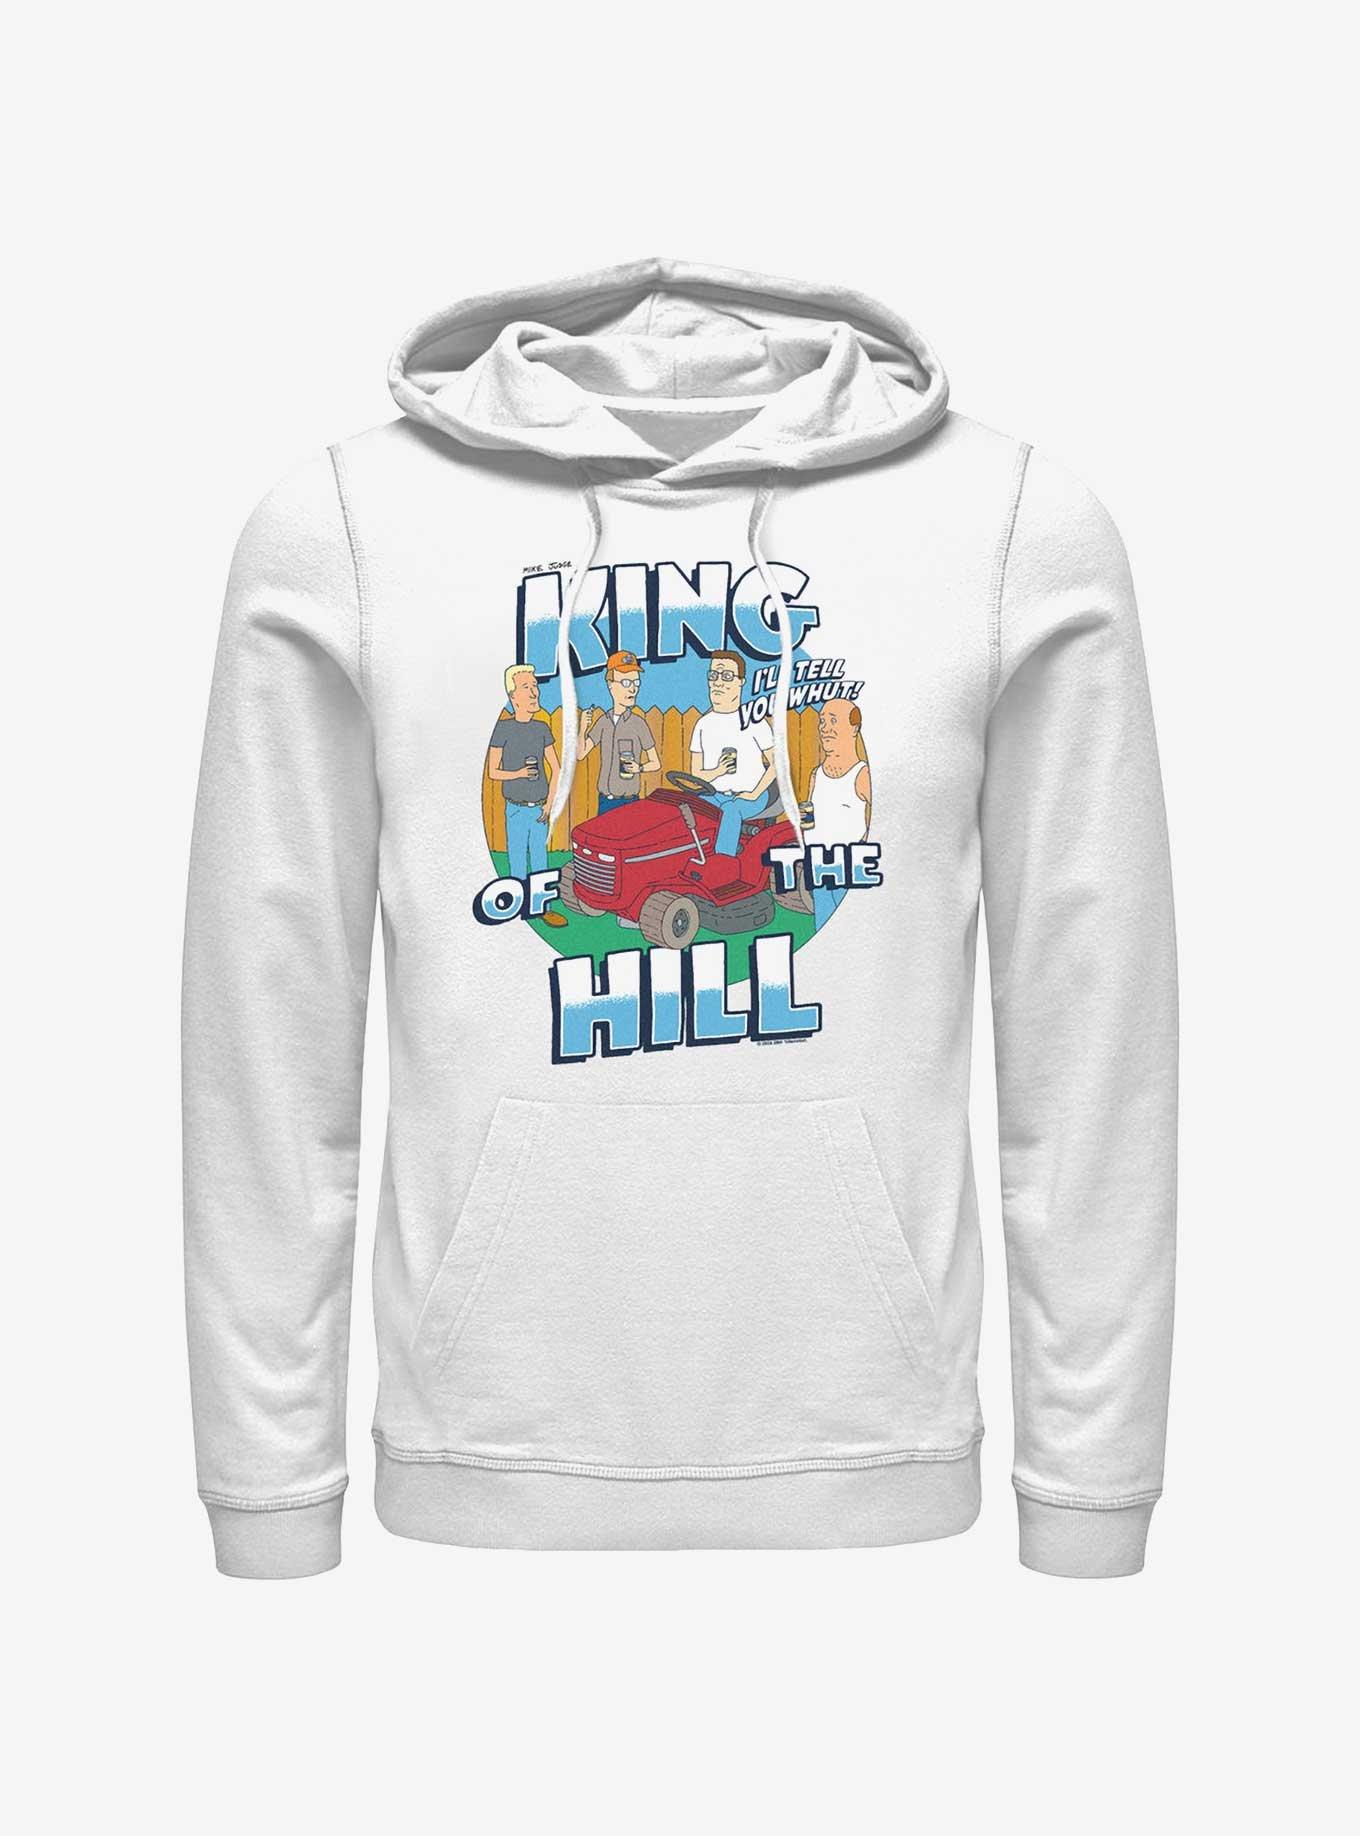 King Of The Hill Whut! Hoodie, WHITE, hi-res